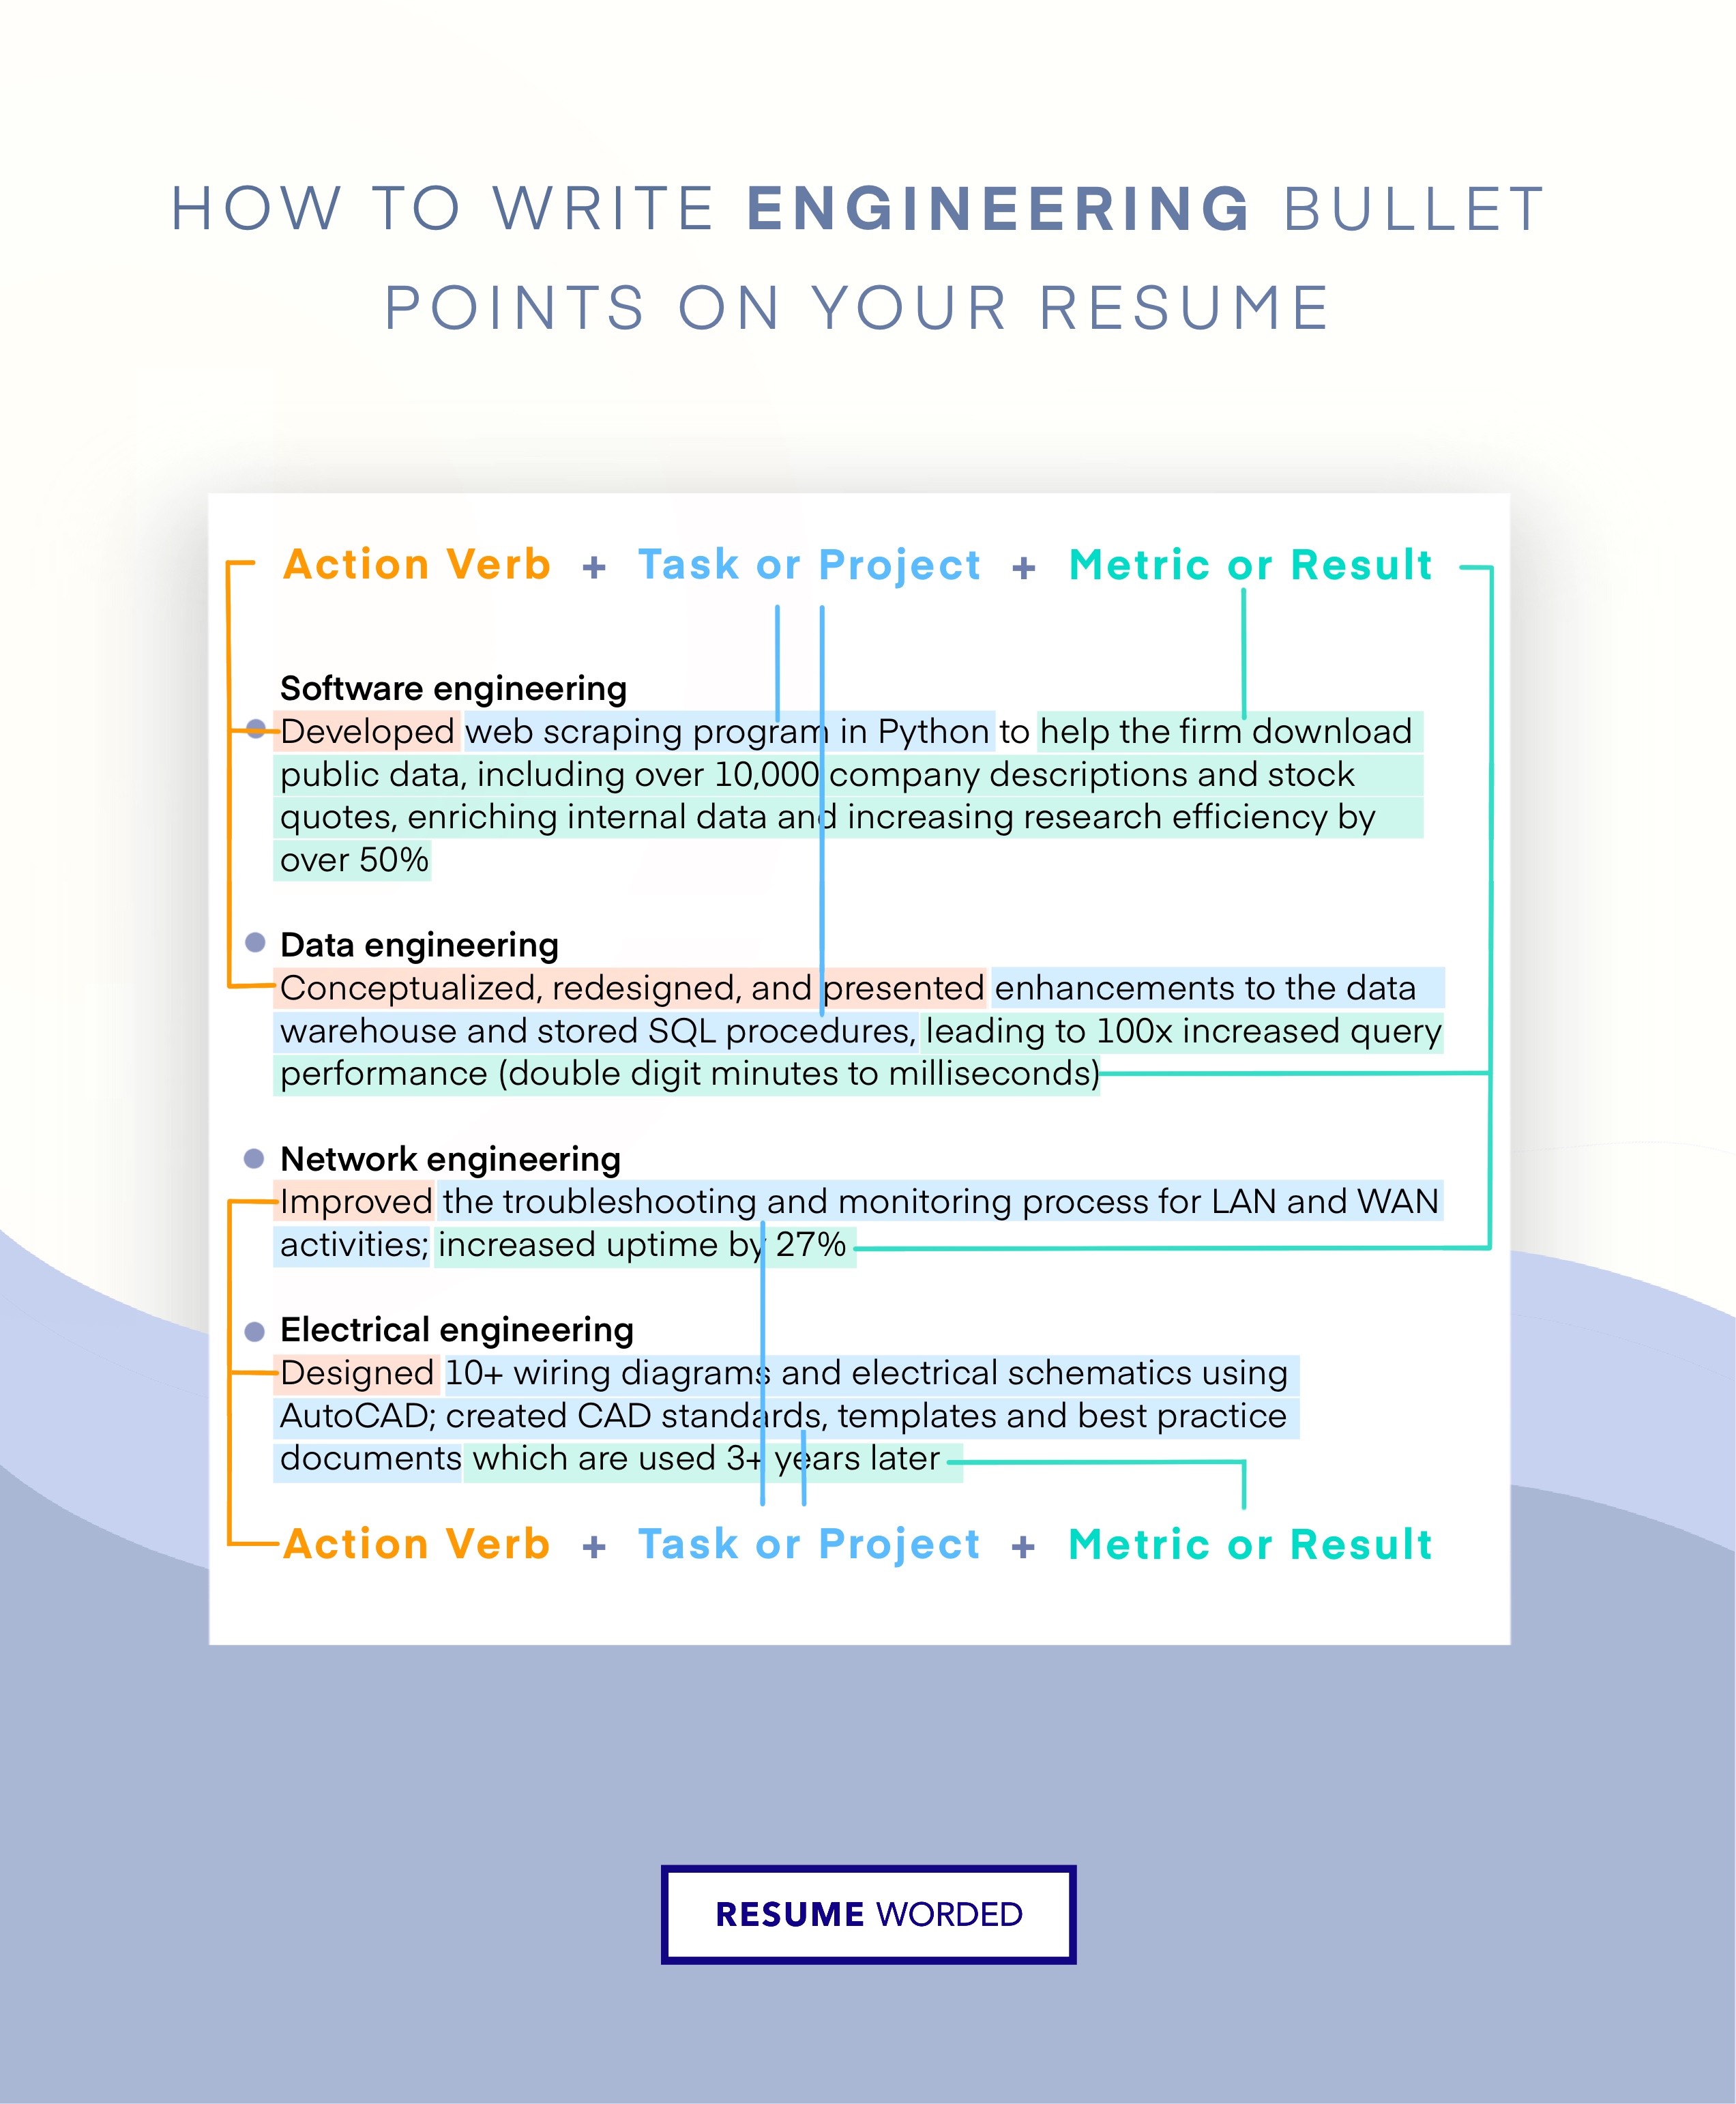 Excellent hard skills that show off technical abilities - Scrum Master Resume